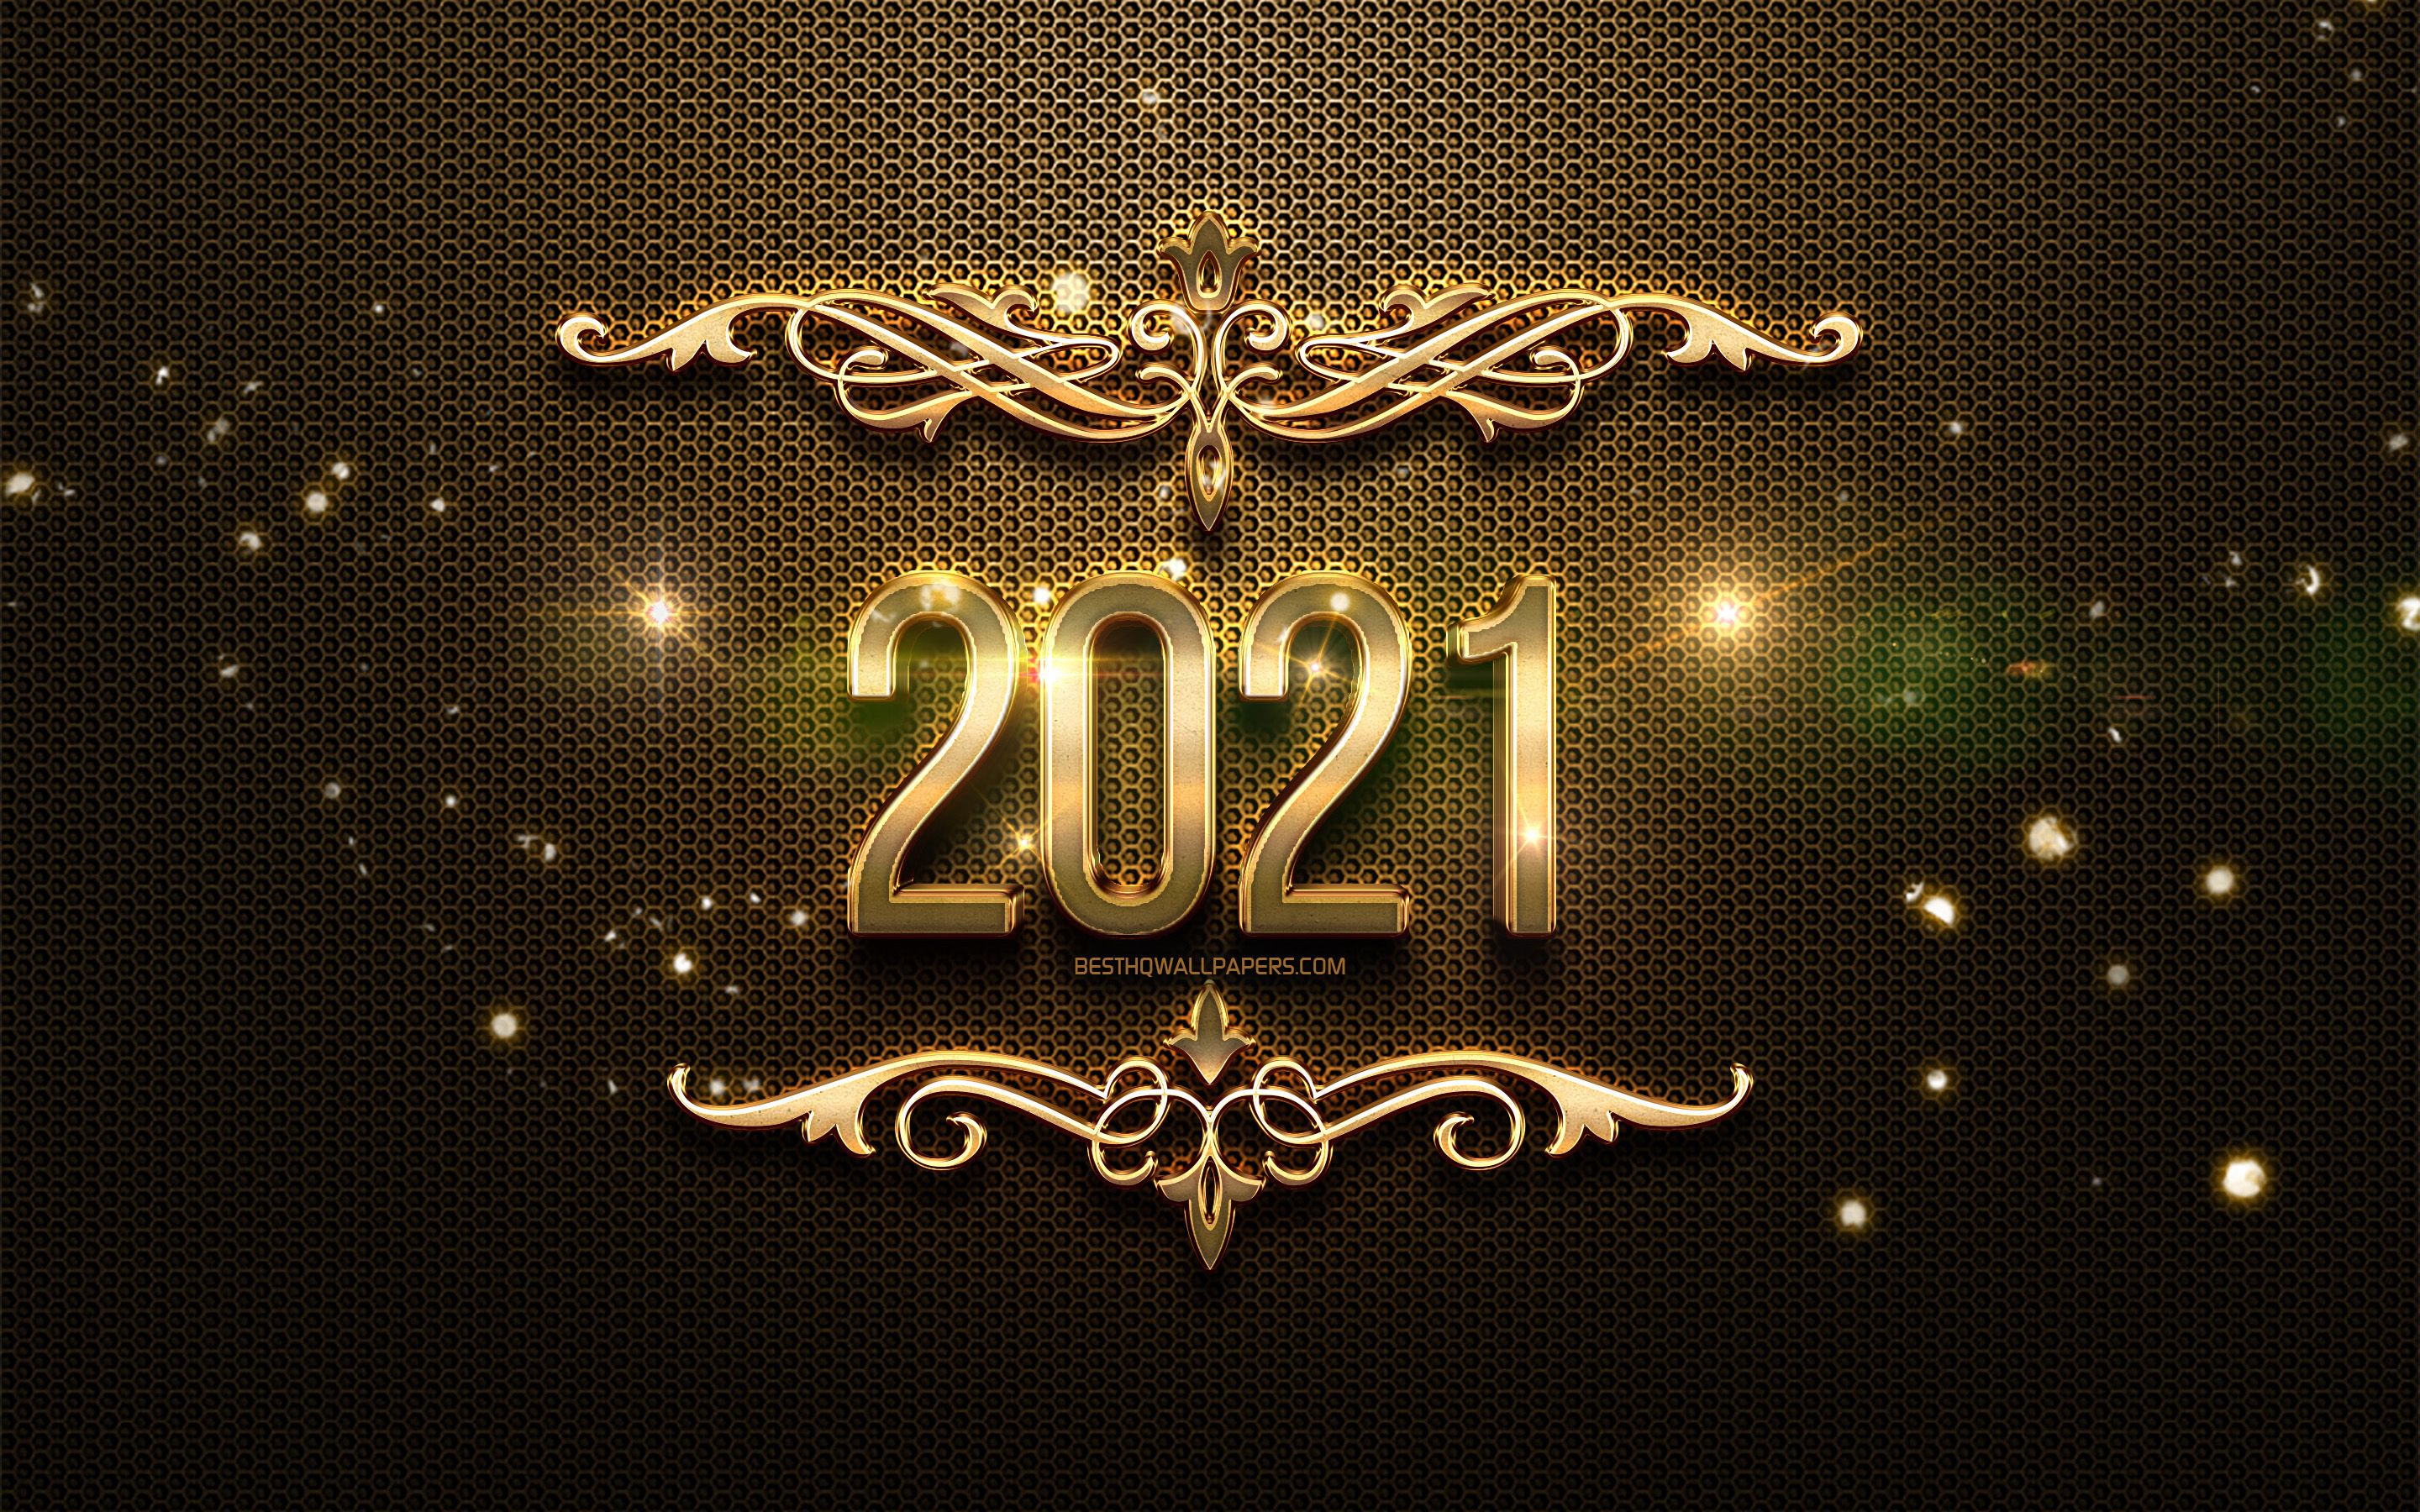 Download wallpapers 4k, 2021 new year, vintage style, 2021 golden digits, 2021 concepts, 2021 on metal background, 2021 year digits, Happy New Year 2021 for desktop with resolution 2880x1800. High Quality HD pictures wallpapers